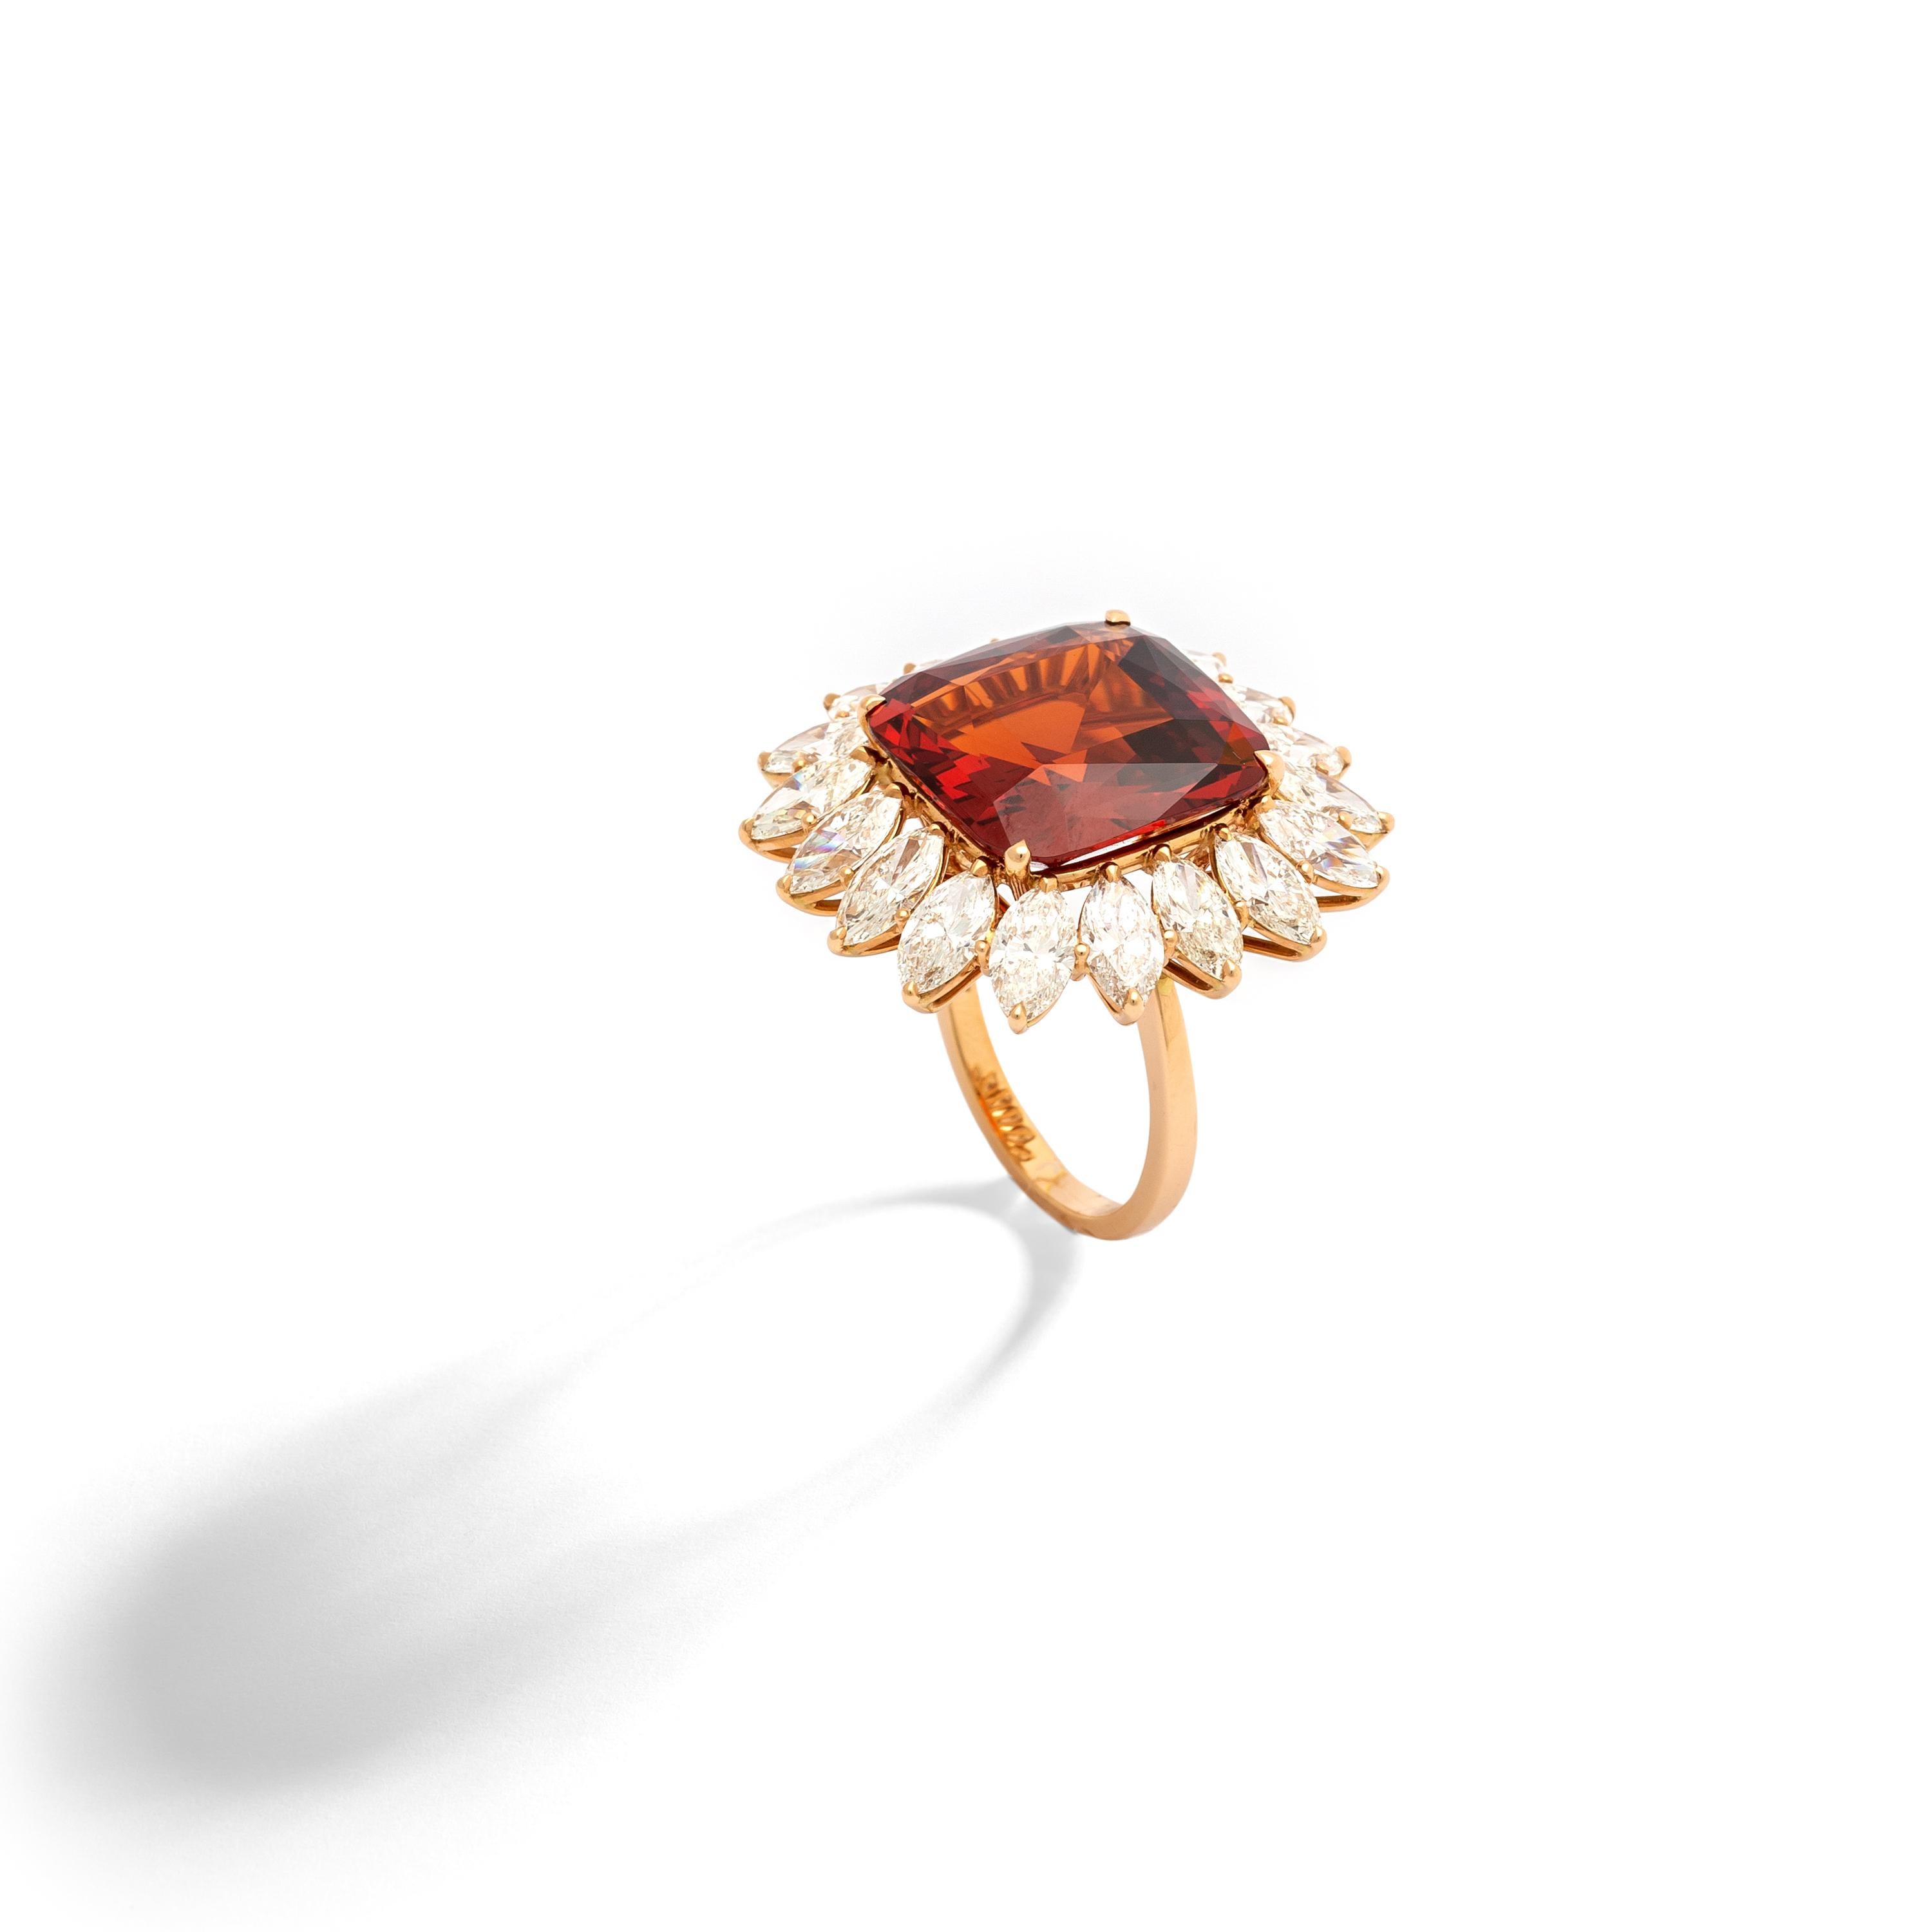 15.98 carats Cushion Garnet spesartite surrounded by 18 Diamonds 5.58 carats on pink gold Ring.
Contemporary.